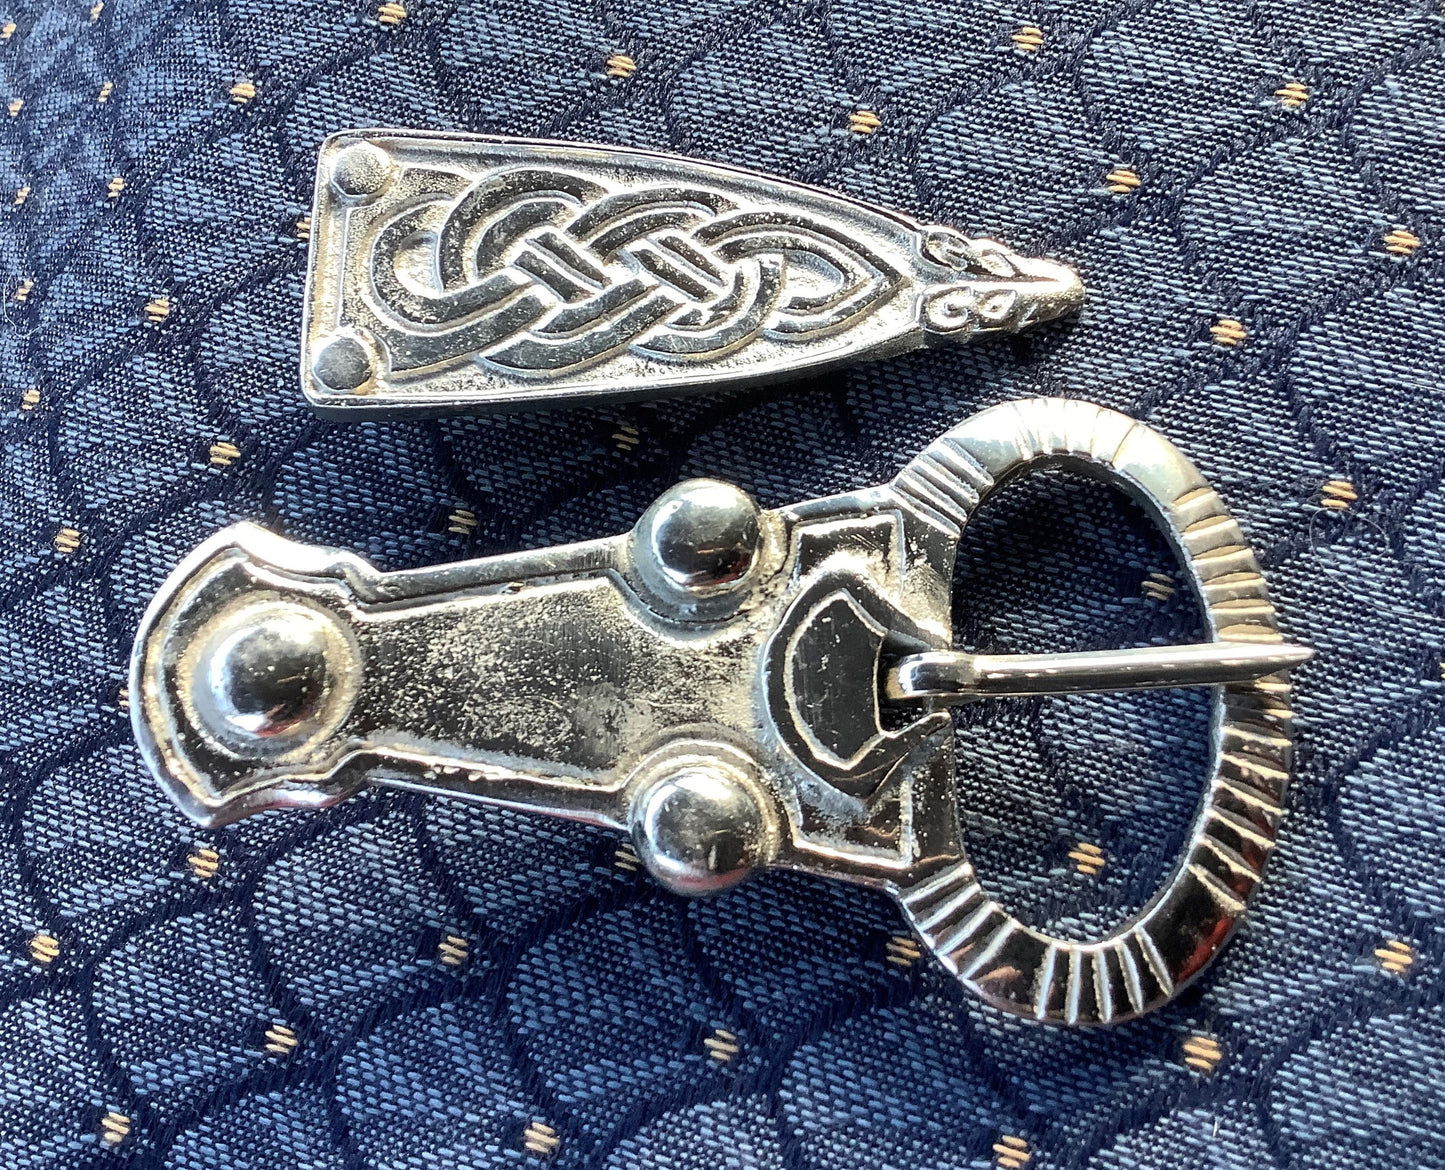 Anglo-Saxon Buckle and Strap-end, Frankish buckle